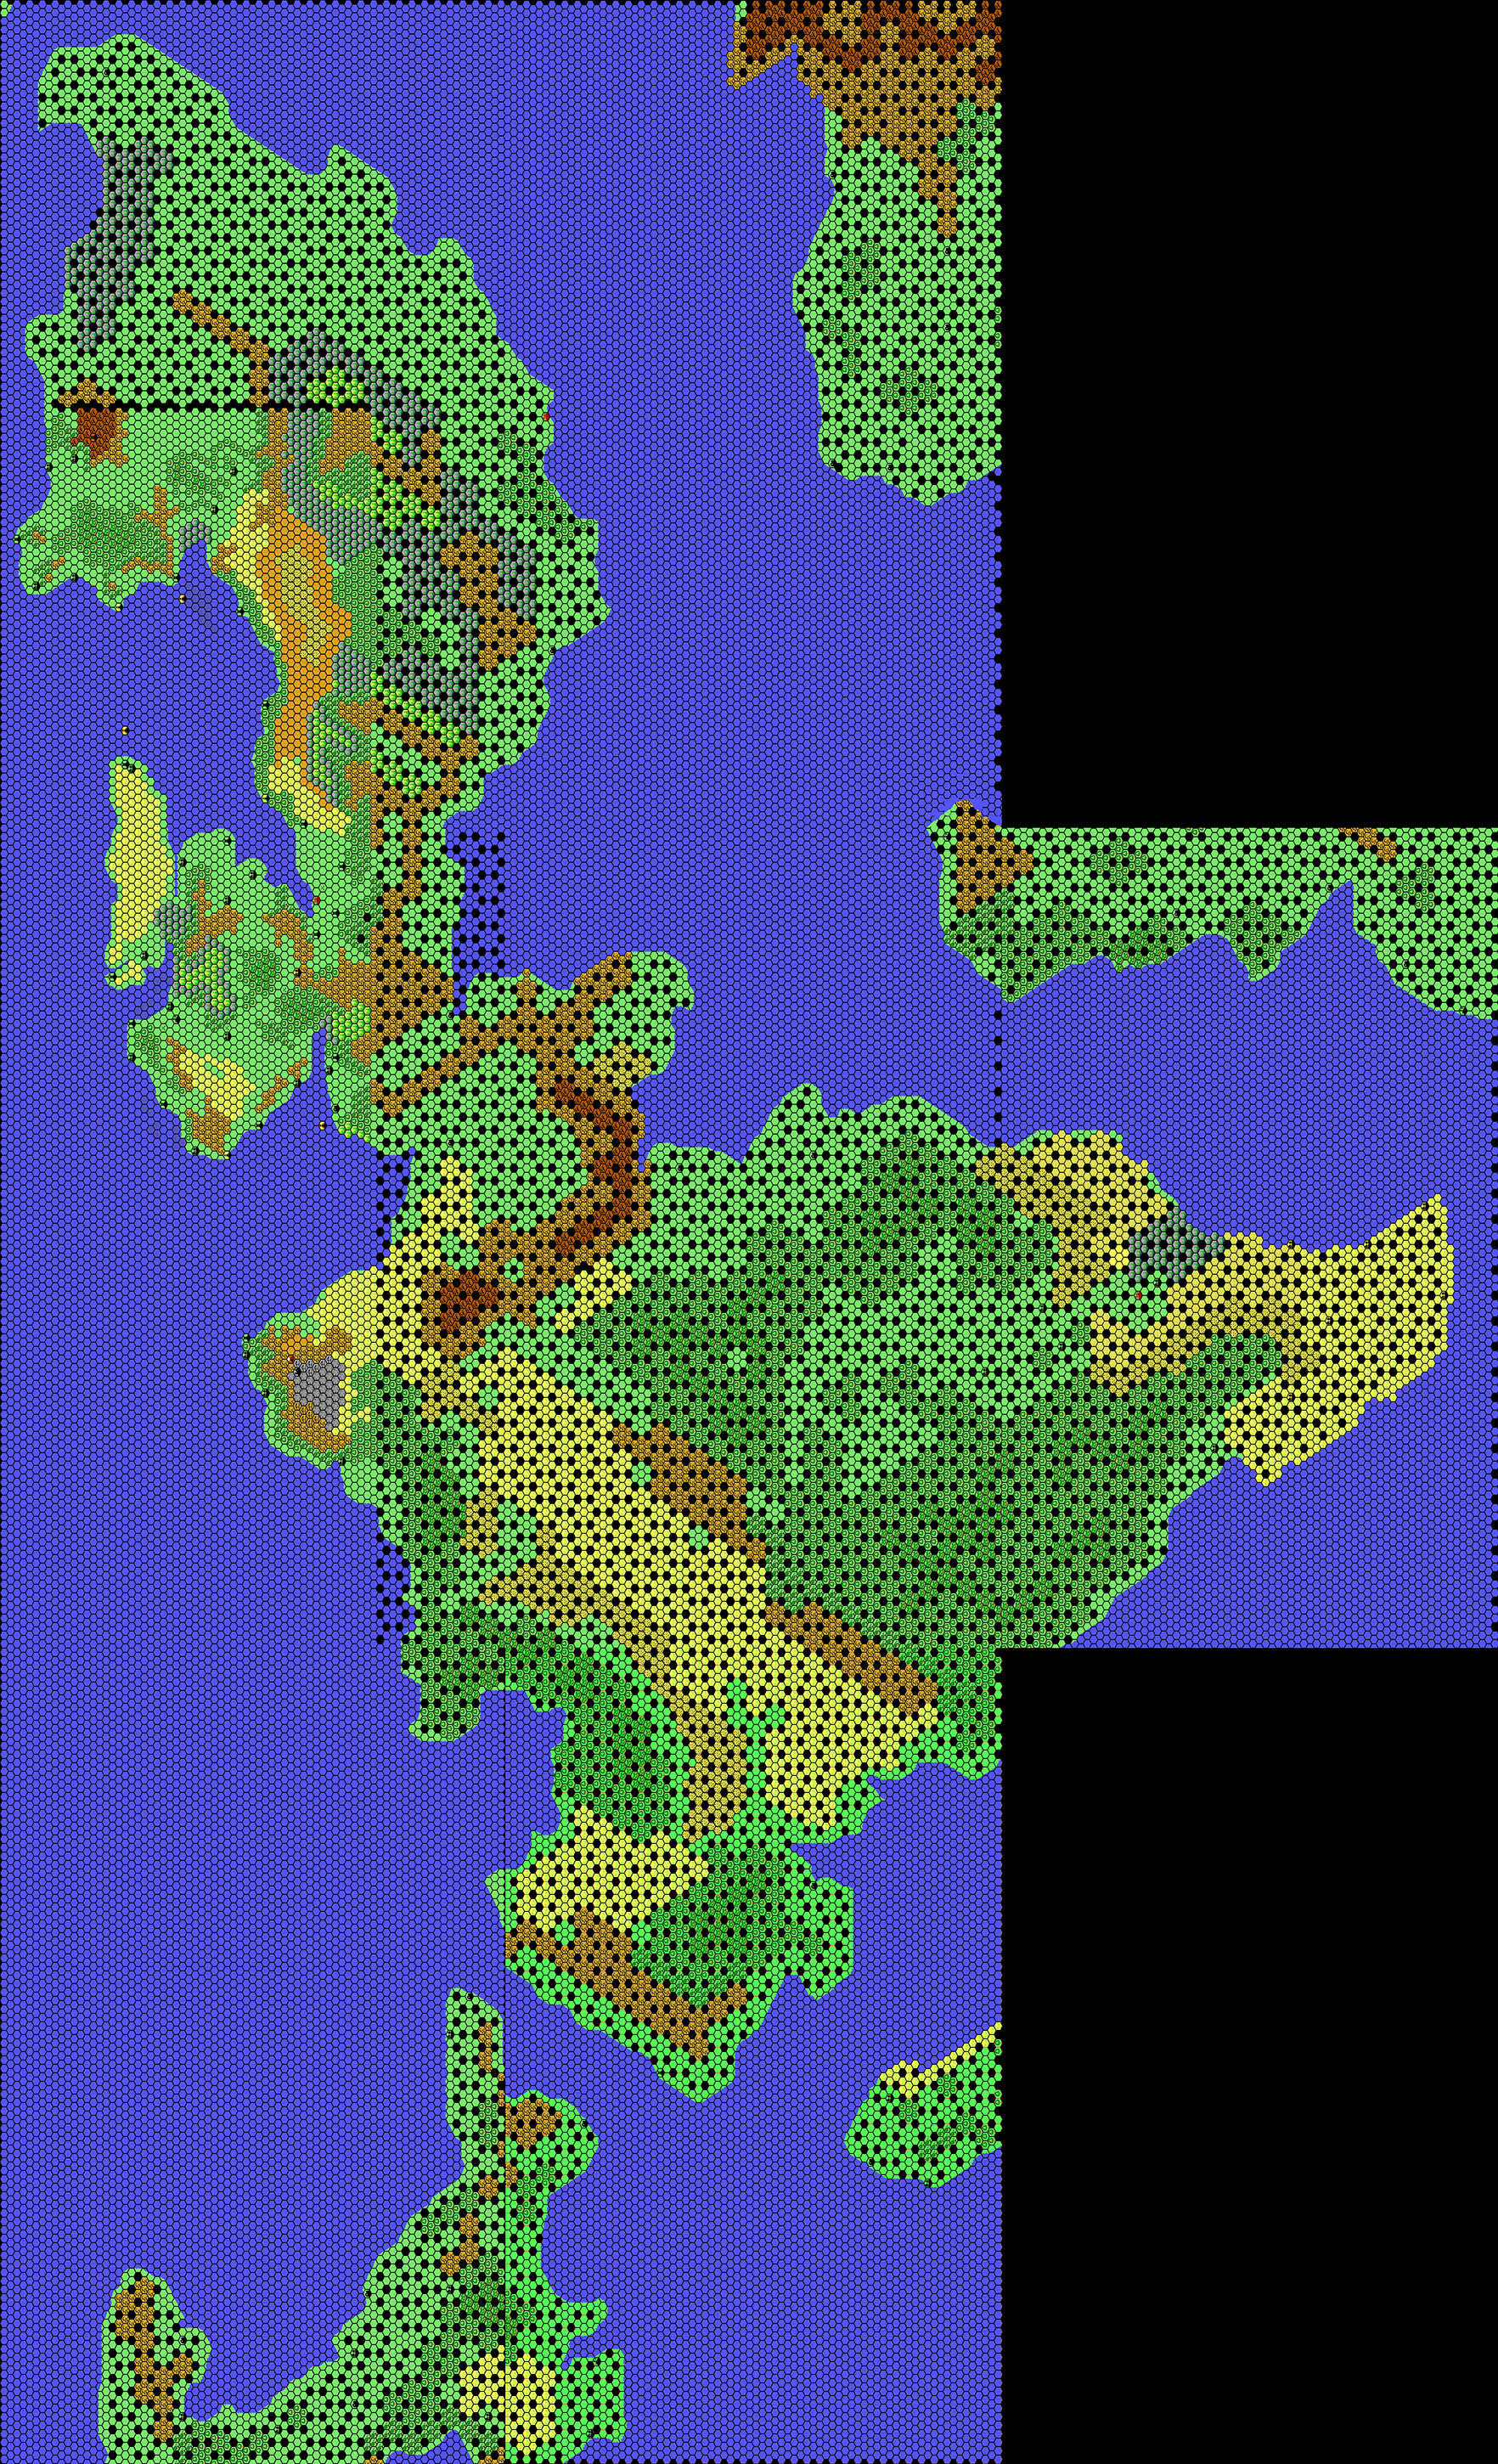 Revised first draft of the Isle of Dawn, 8 miles per hex by Thibault Sarlat, September 2001 (combined by Thorfinn Tait, October 2021)